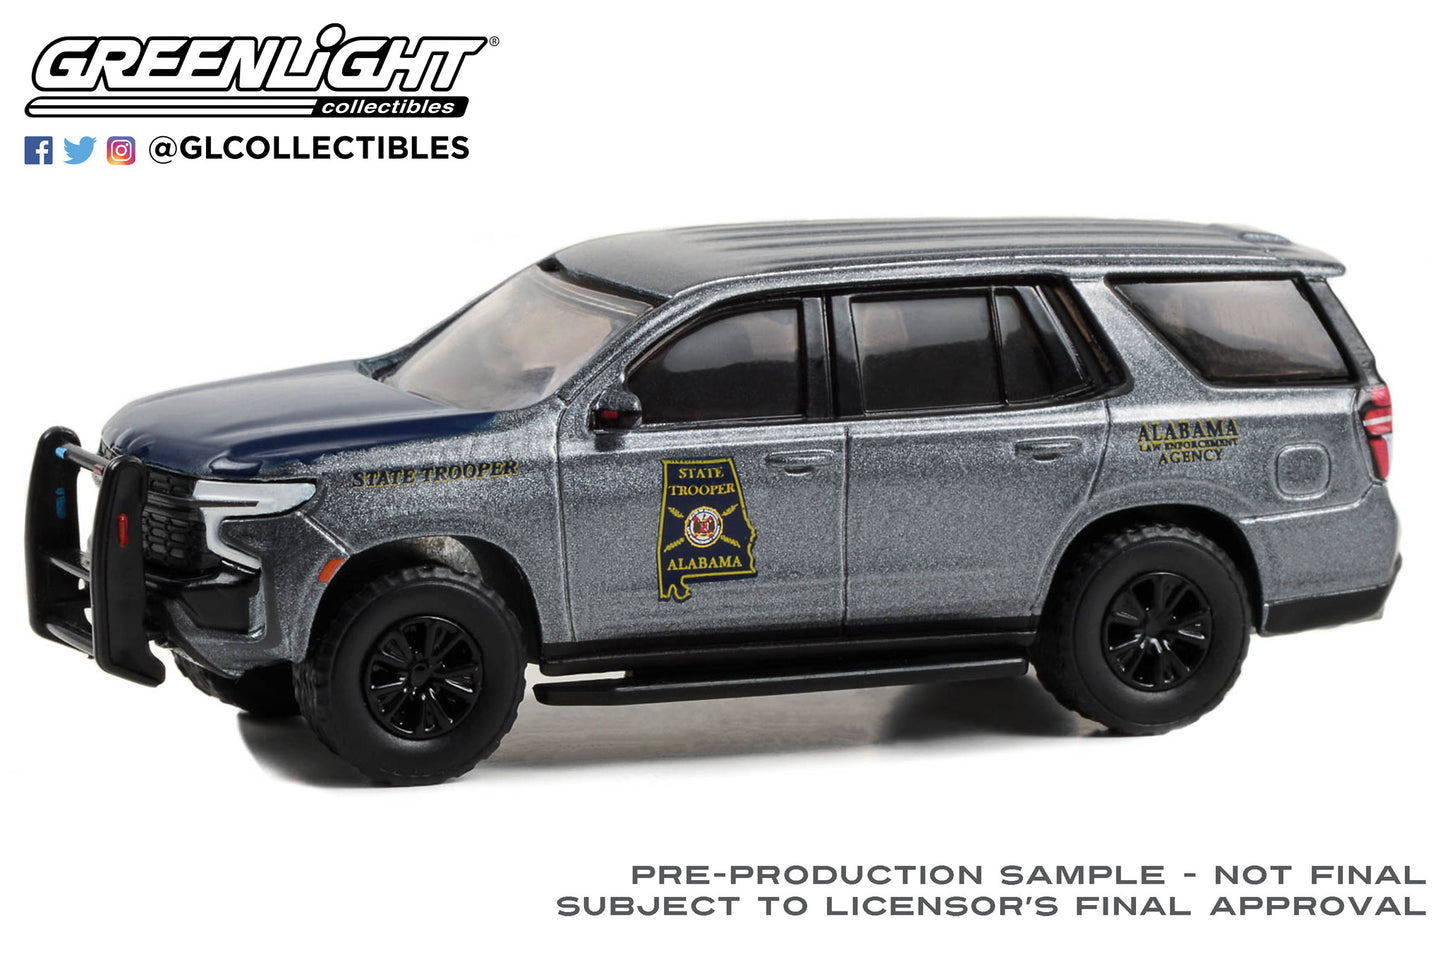 GreenLight 1:64 Hot Pursuit - 2022 Chevrolet Tahoe Police Pursuit Vehicle (PPV) - Alabama State Trooper 30468